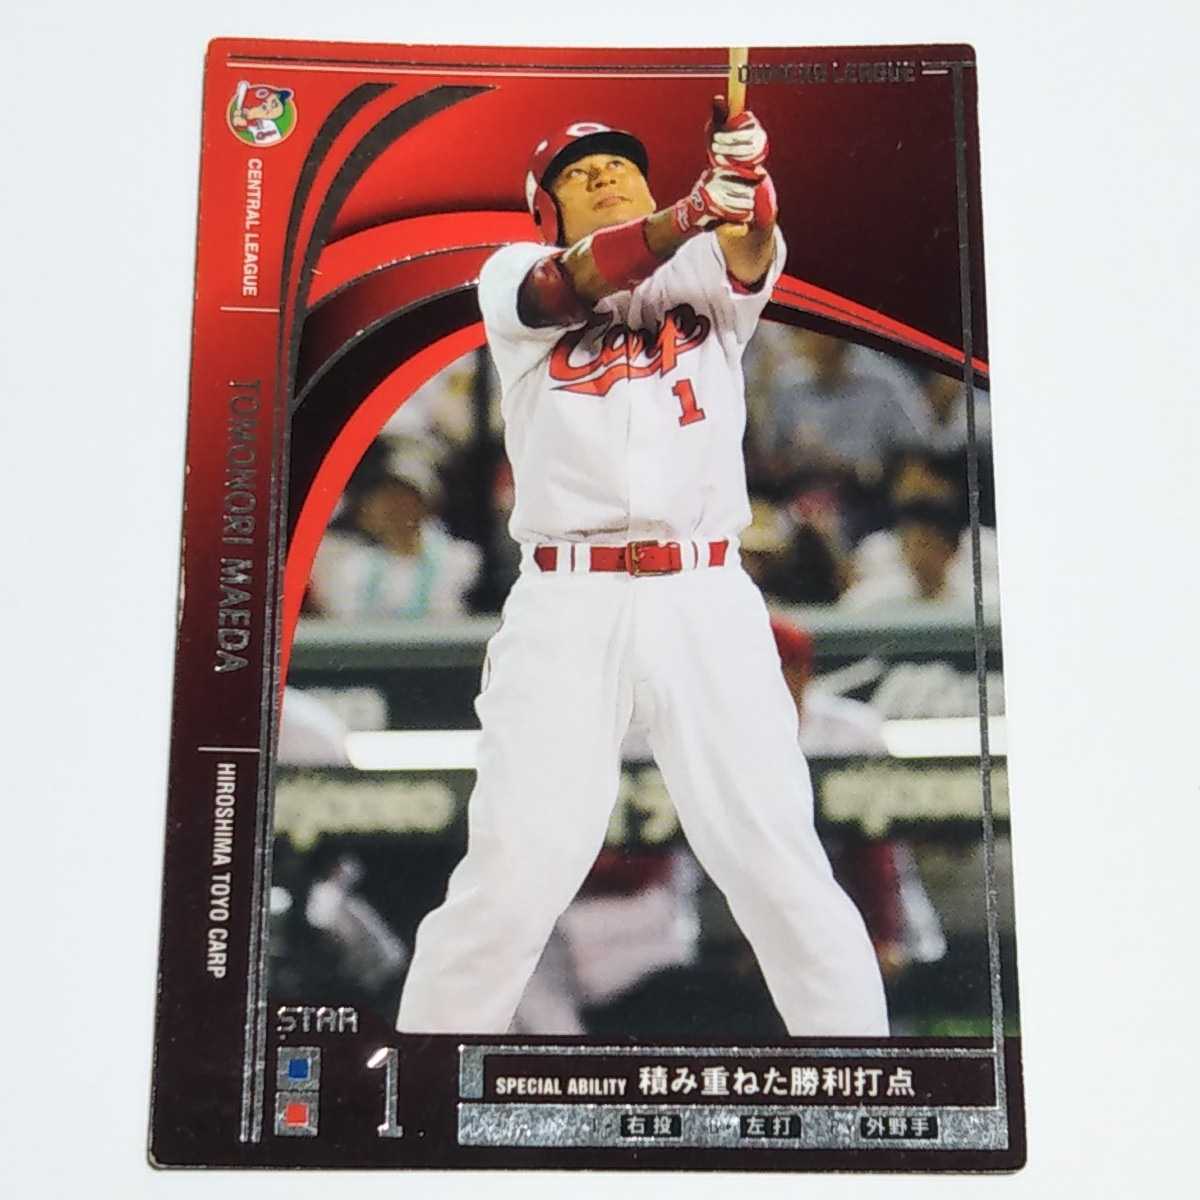  Professional Baseball Owners League OL09 Hiroshima front rice field . virtue ST card 